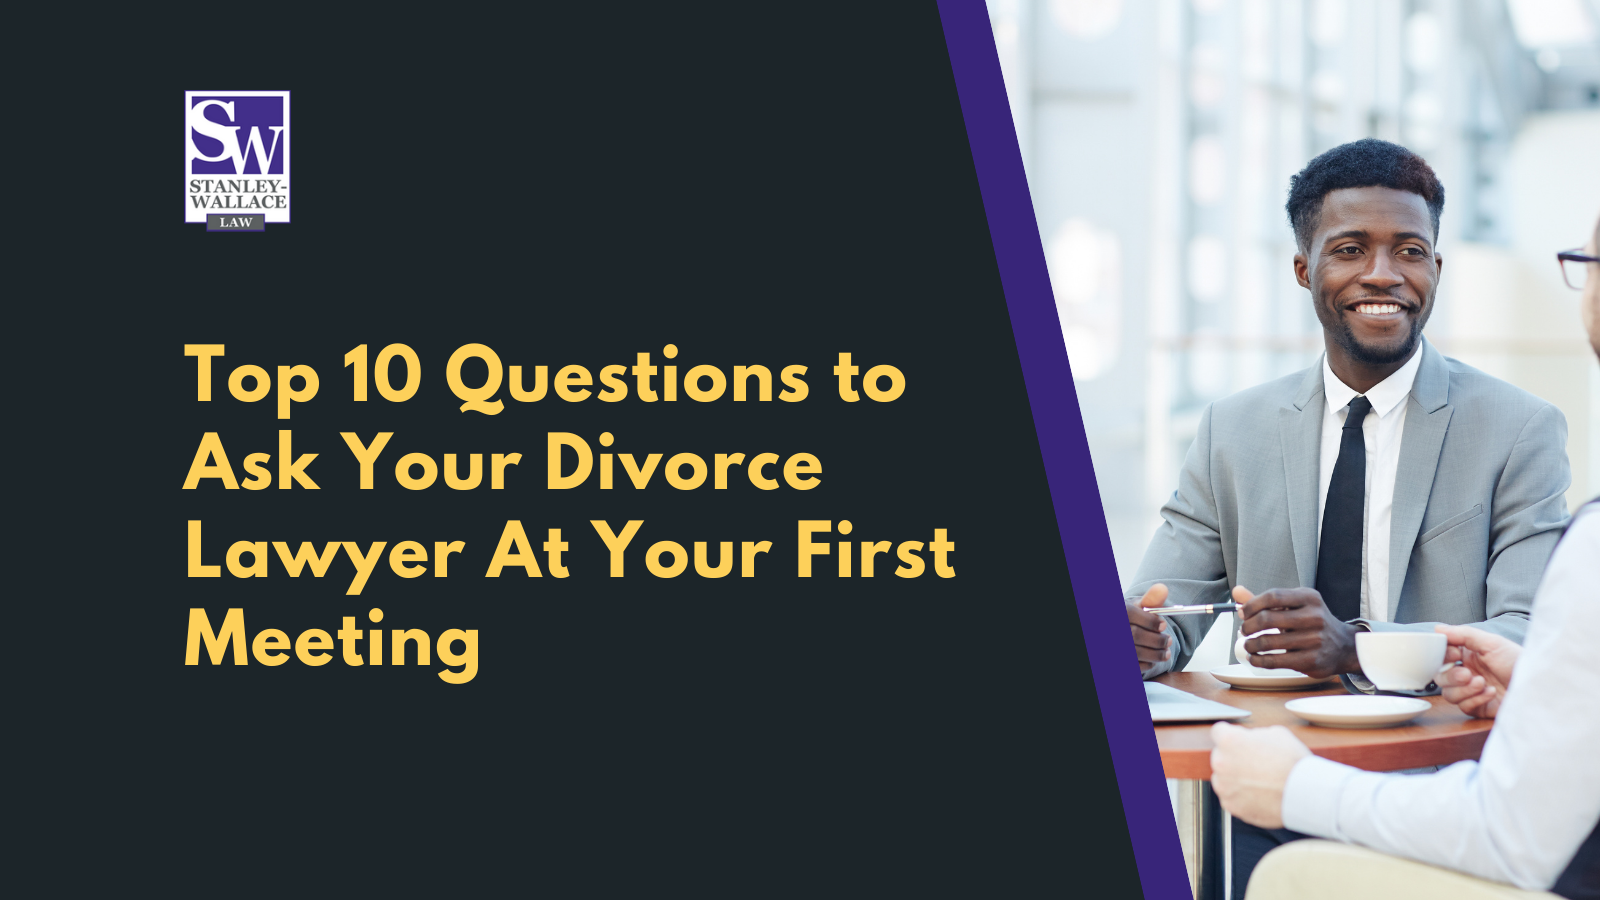 Top 10 Questions to Ask Your Divorce Lawyer At Your First Meeting - Stanley-Wallace Law - slidell louisiana